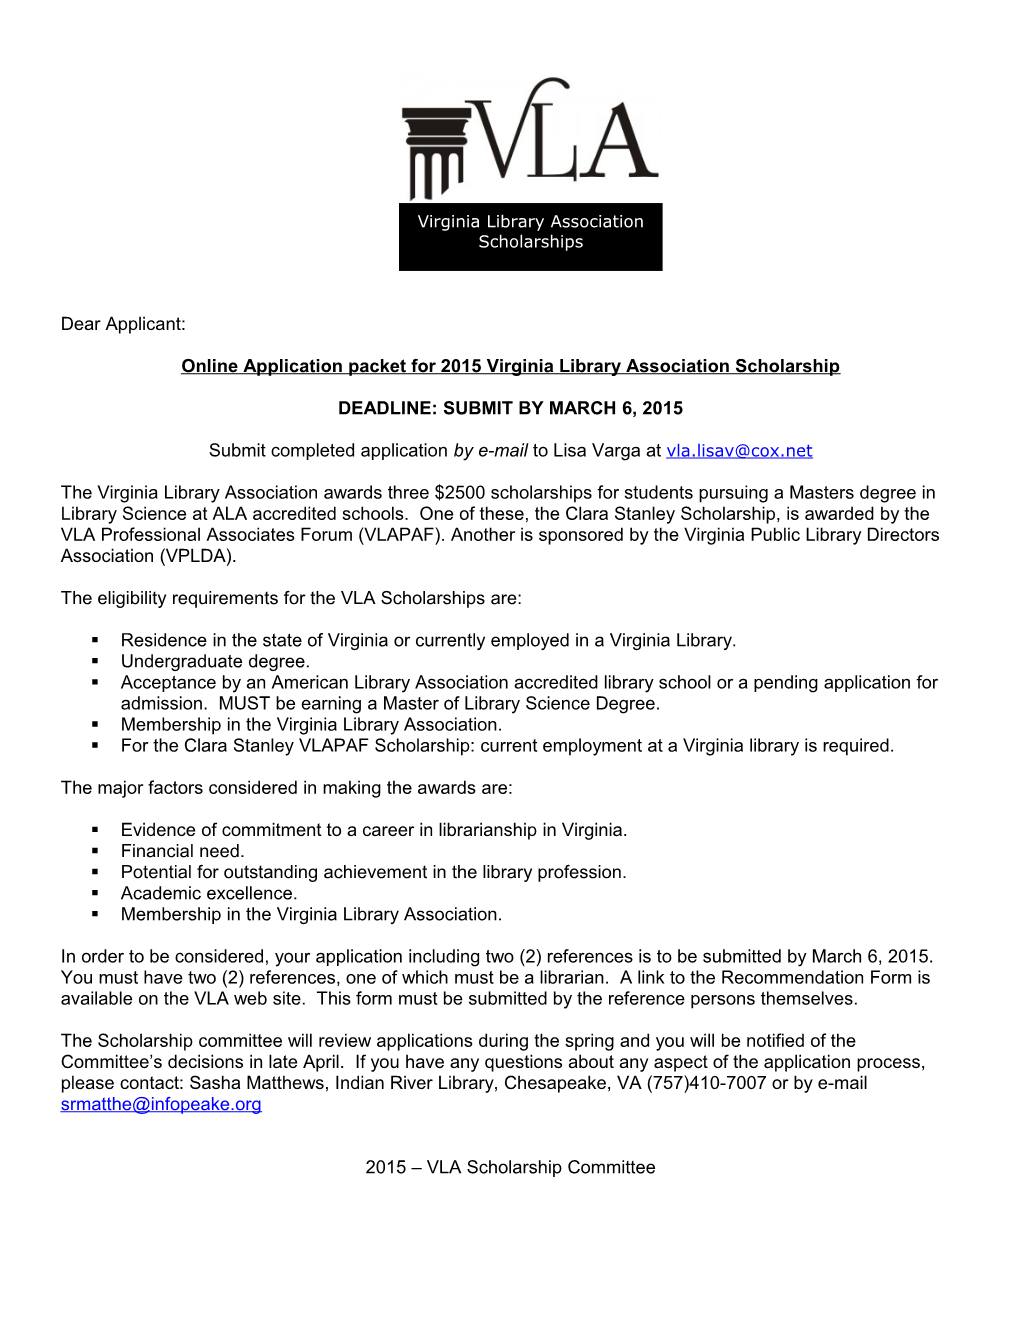 Online Application Packet for 2015 Virginia Library Association Scholarship